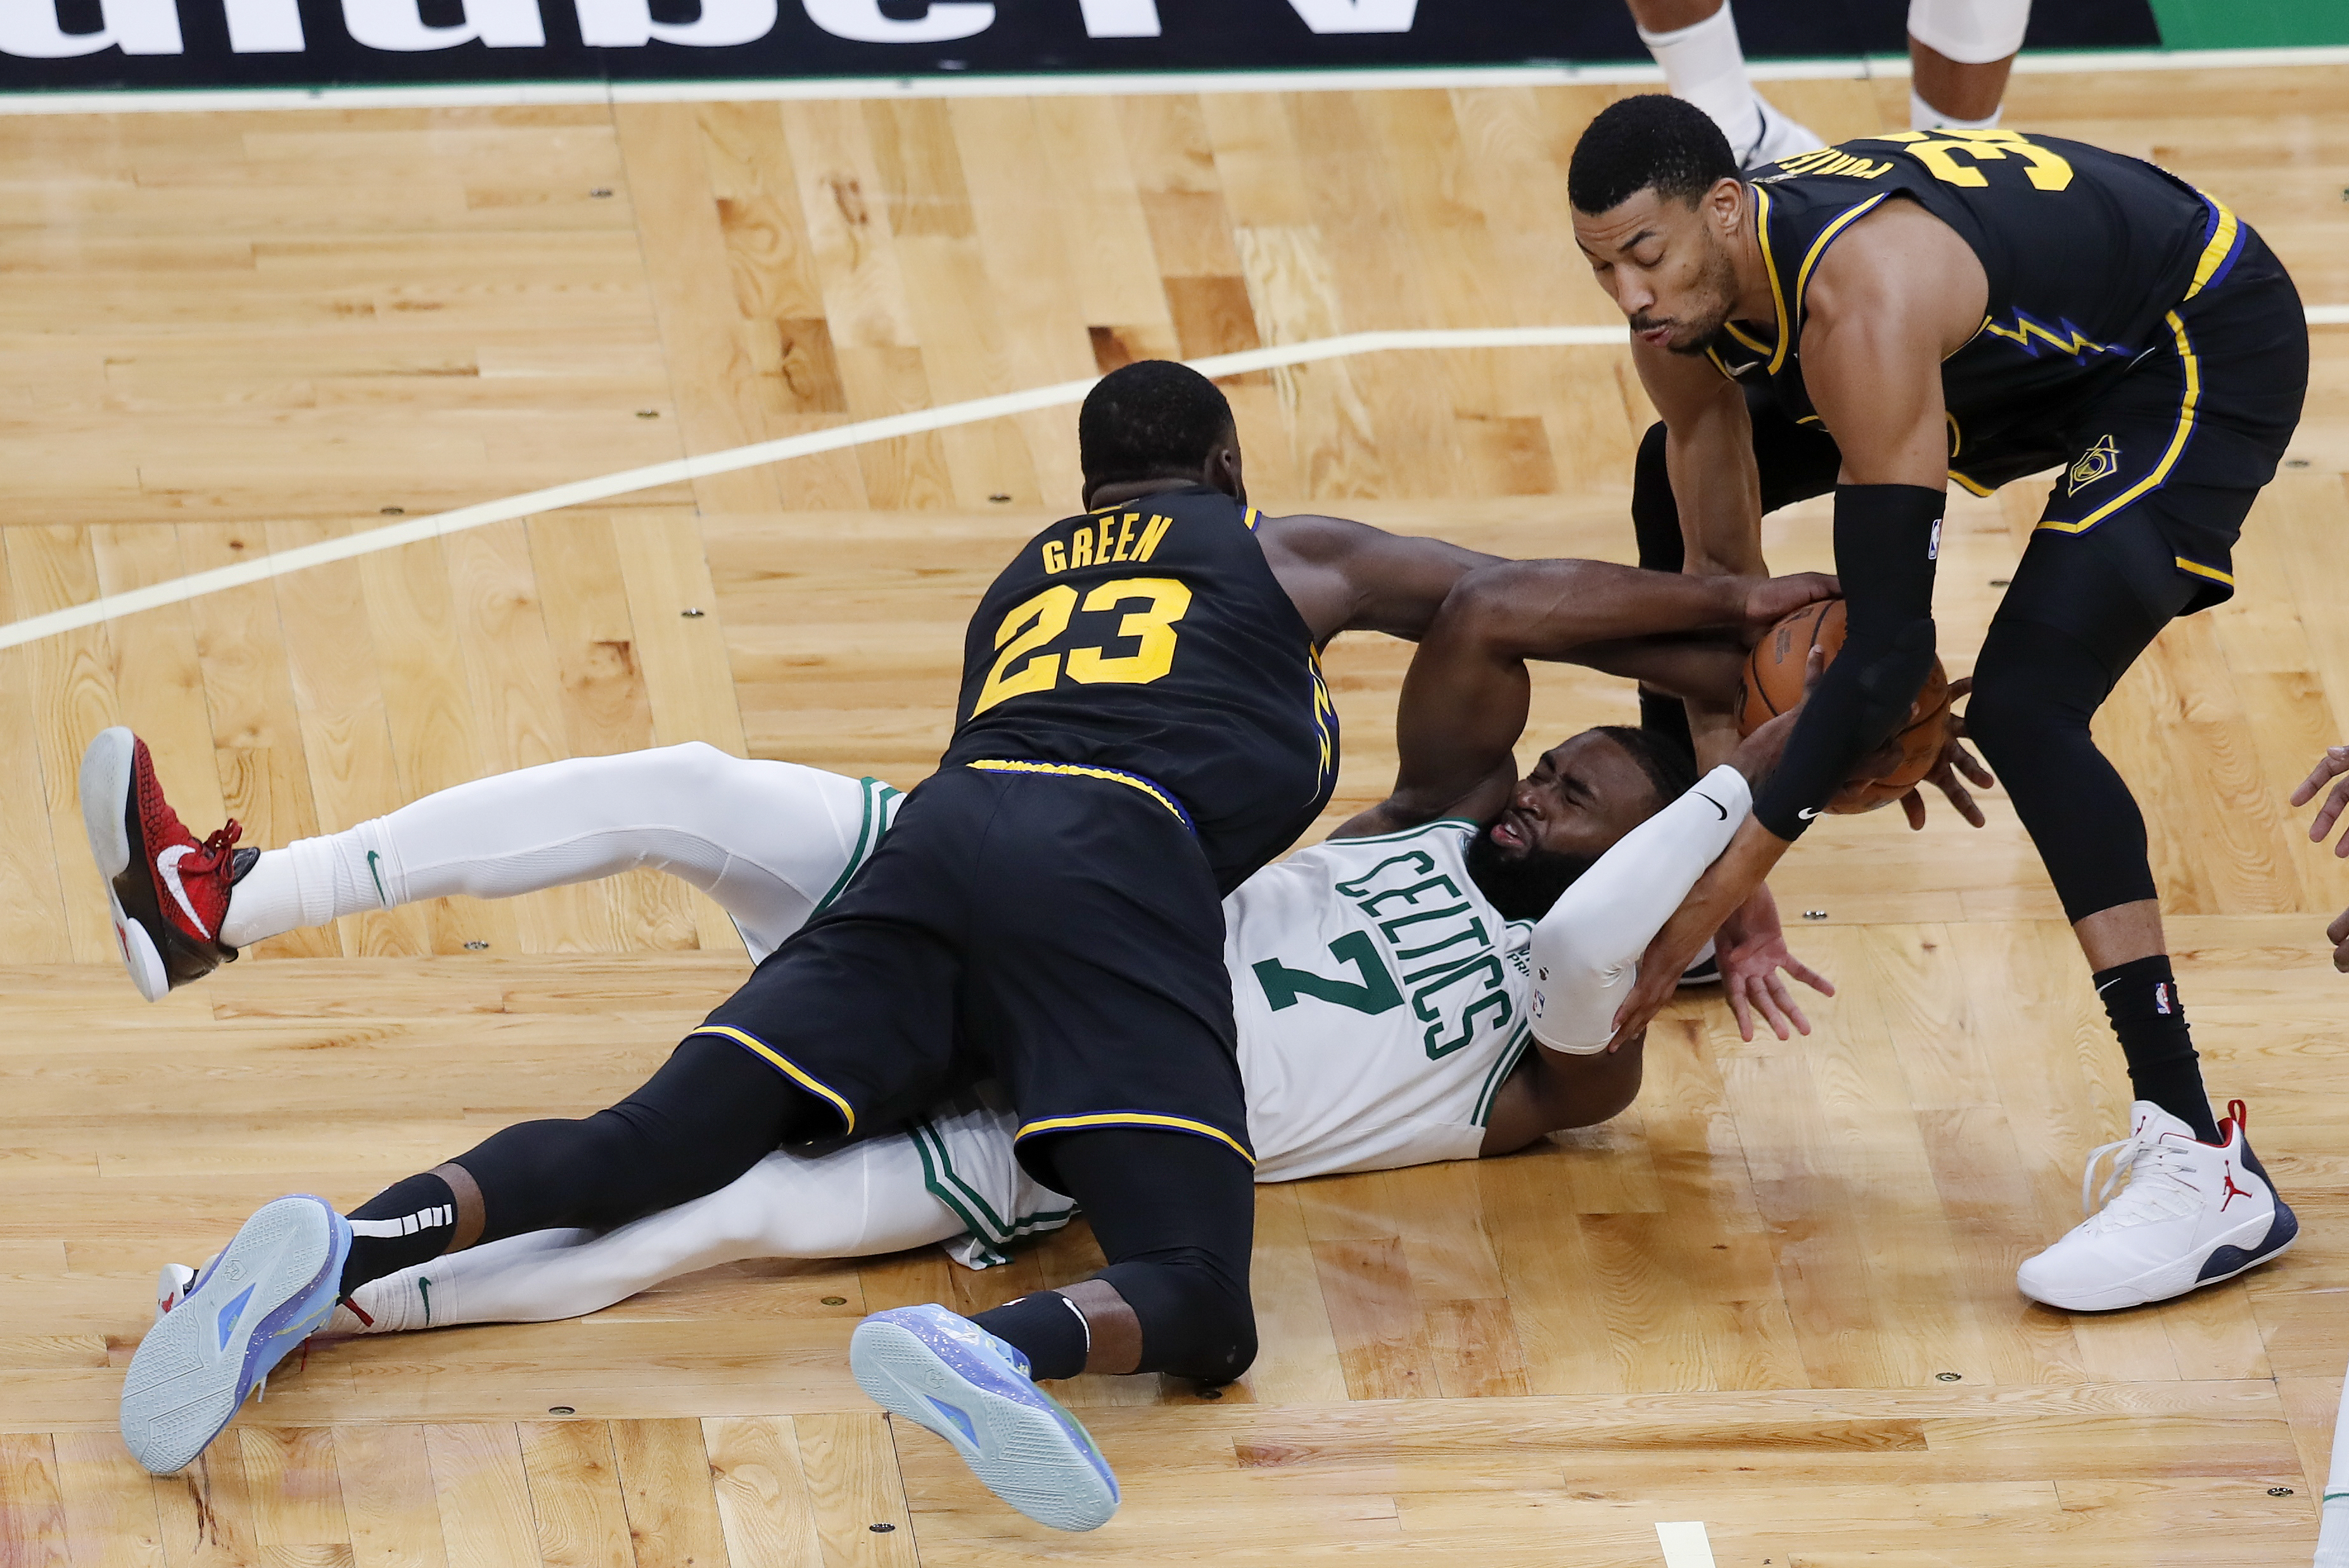 Celtics beat Warriors 116-100, take 2-1 lead in NBA Finals – The